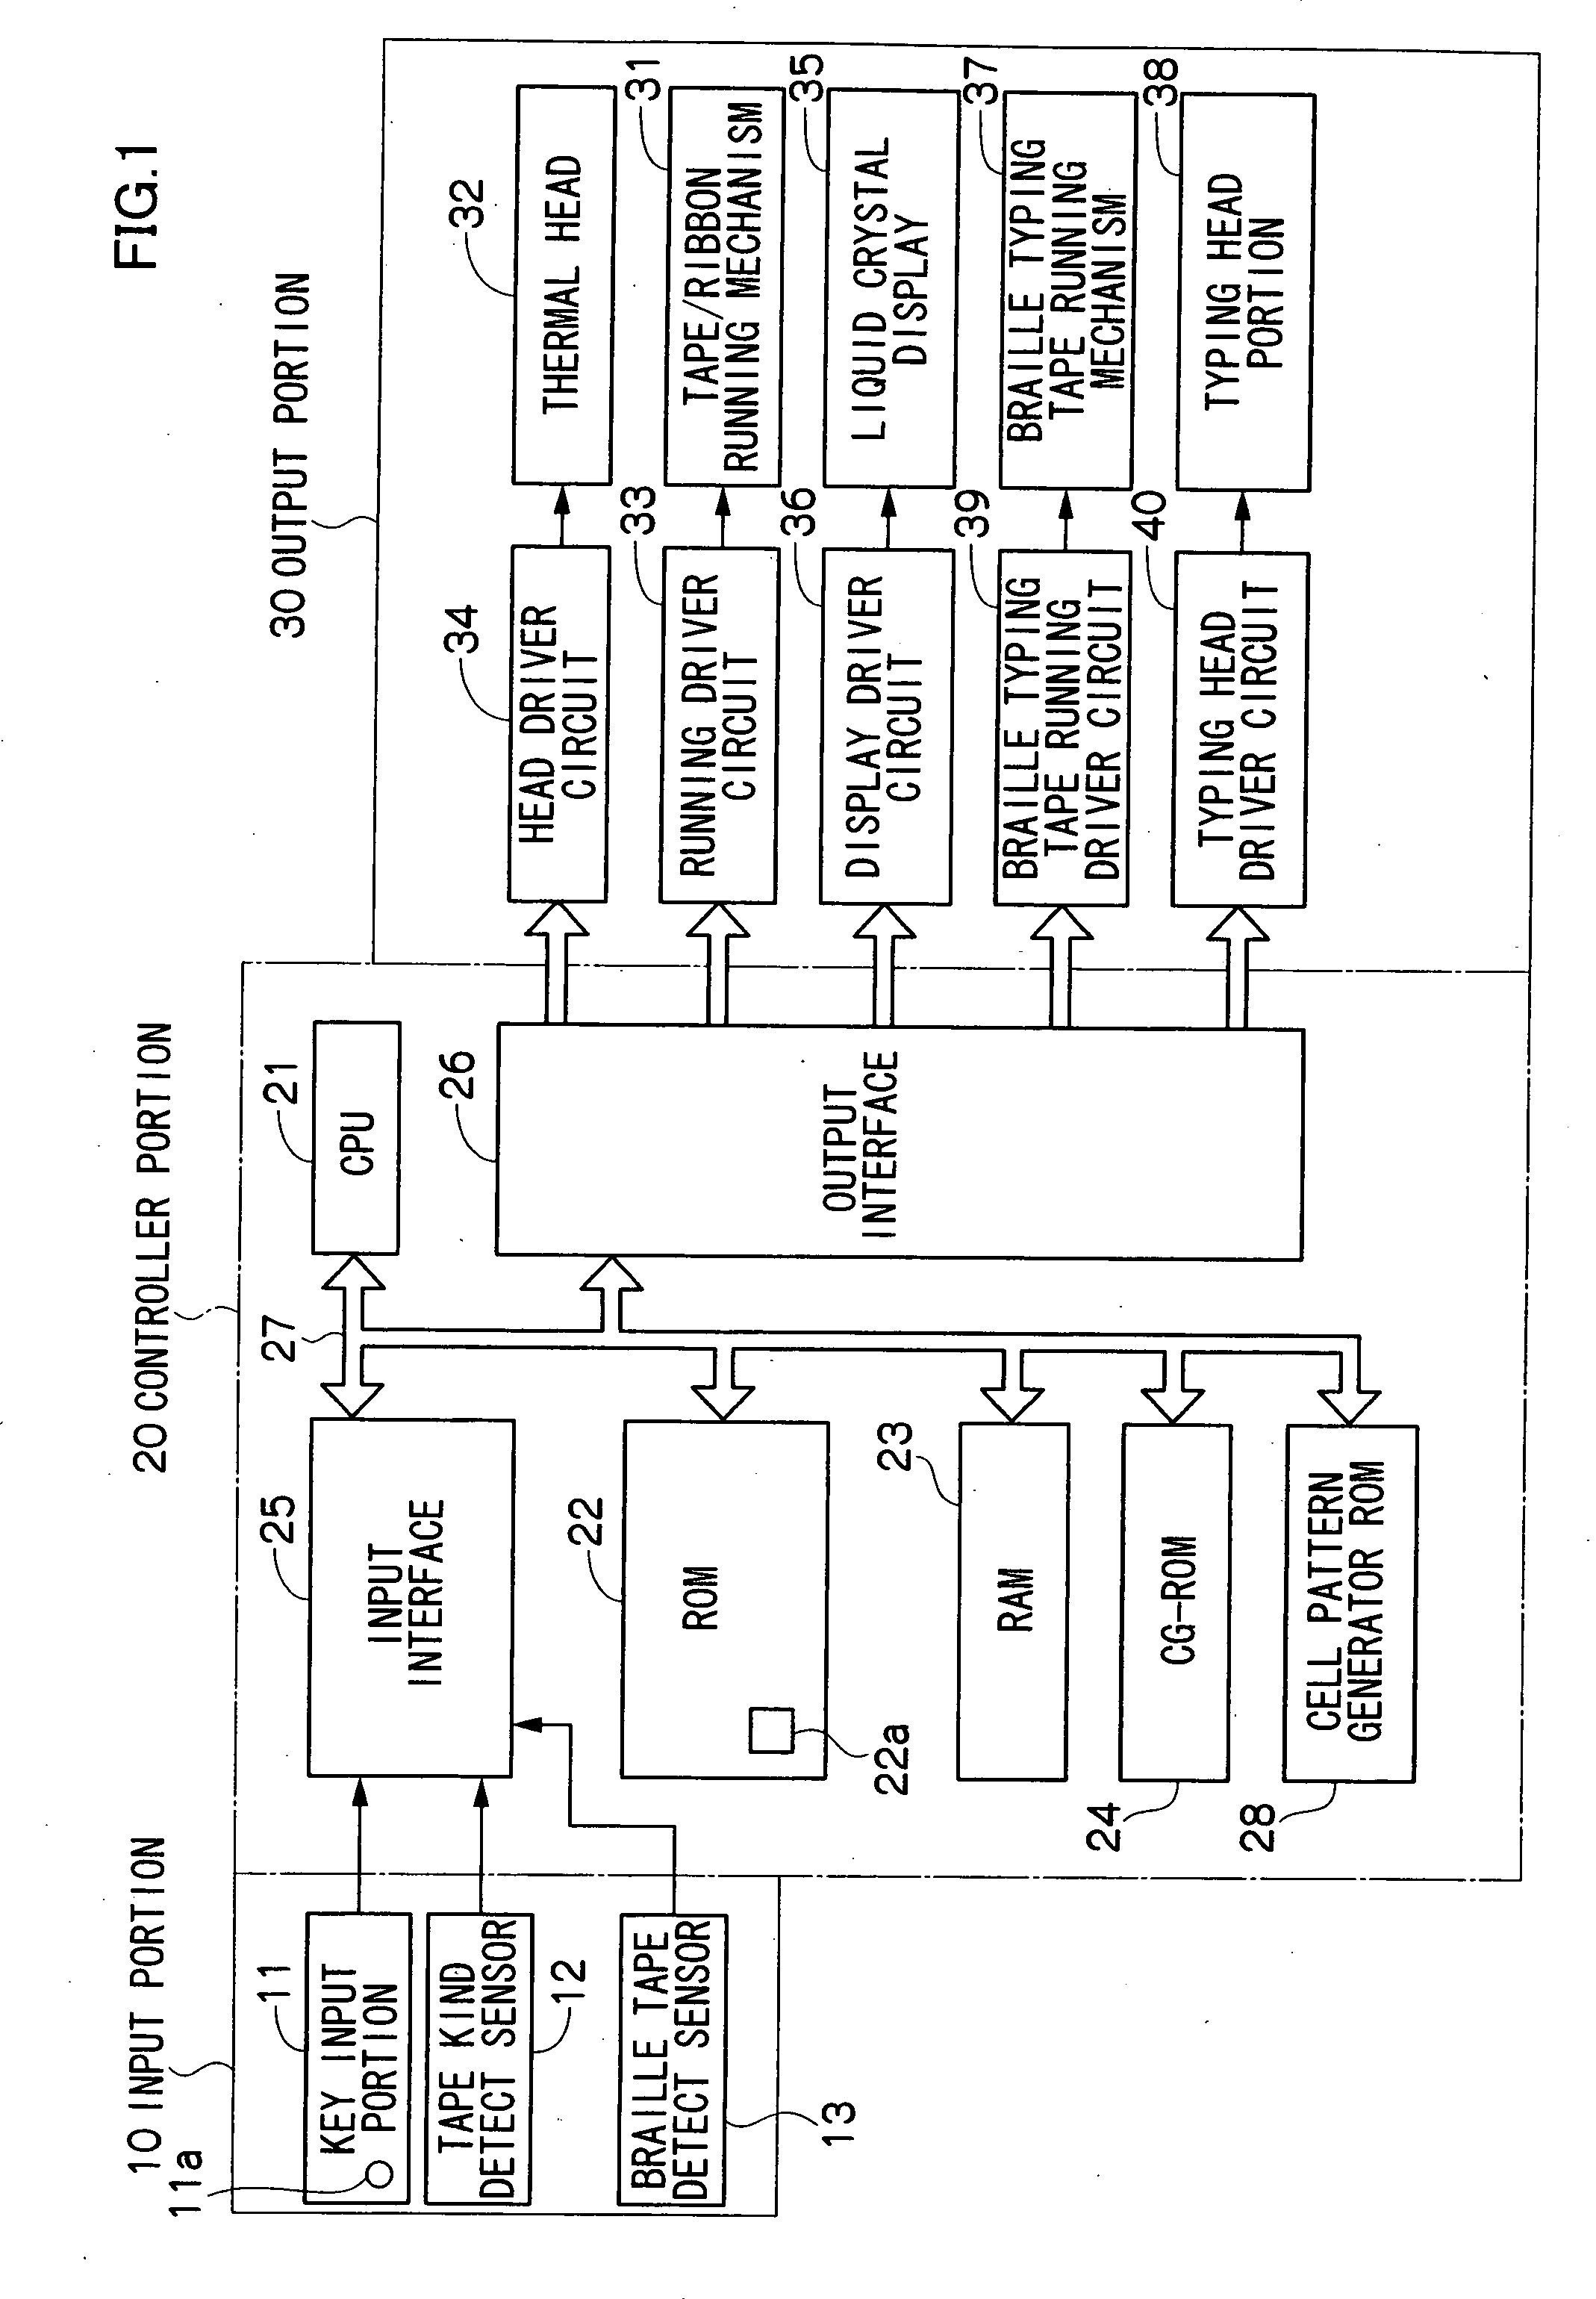 Finger reading label producing system, method and program